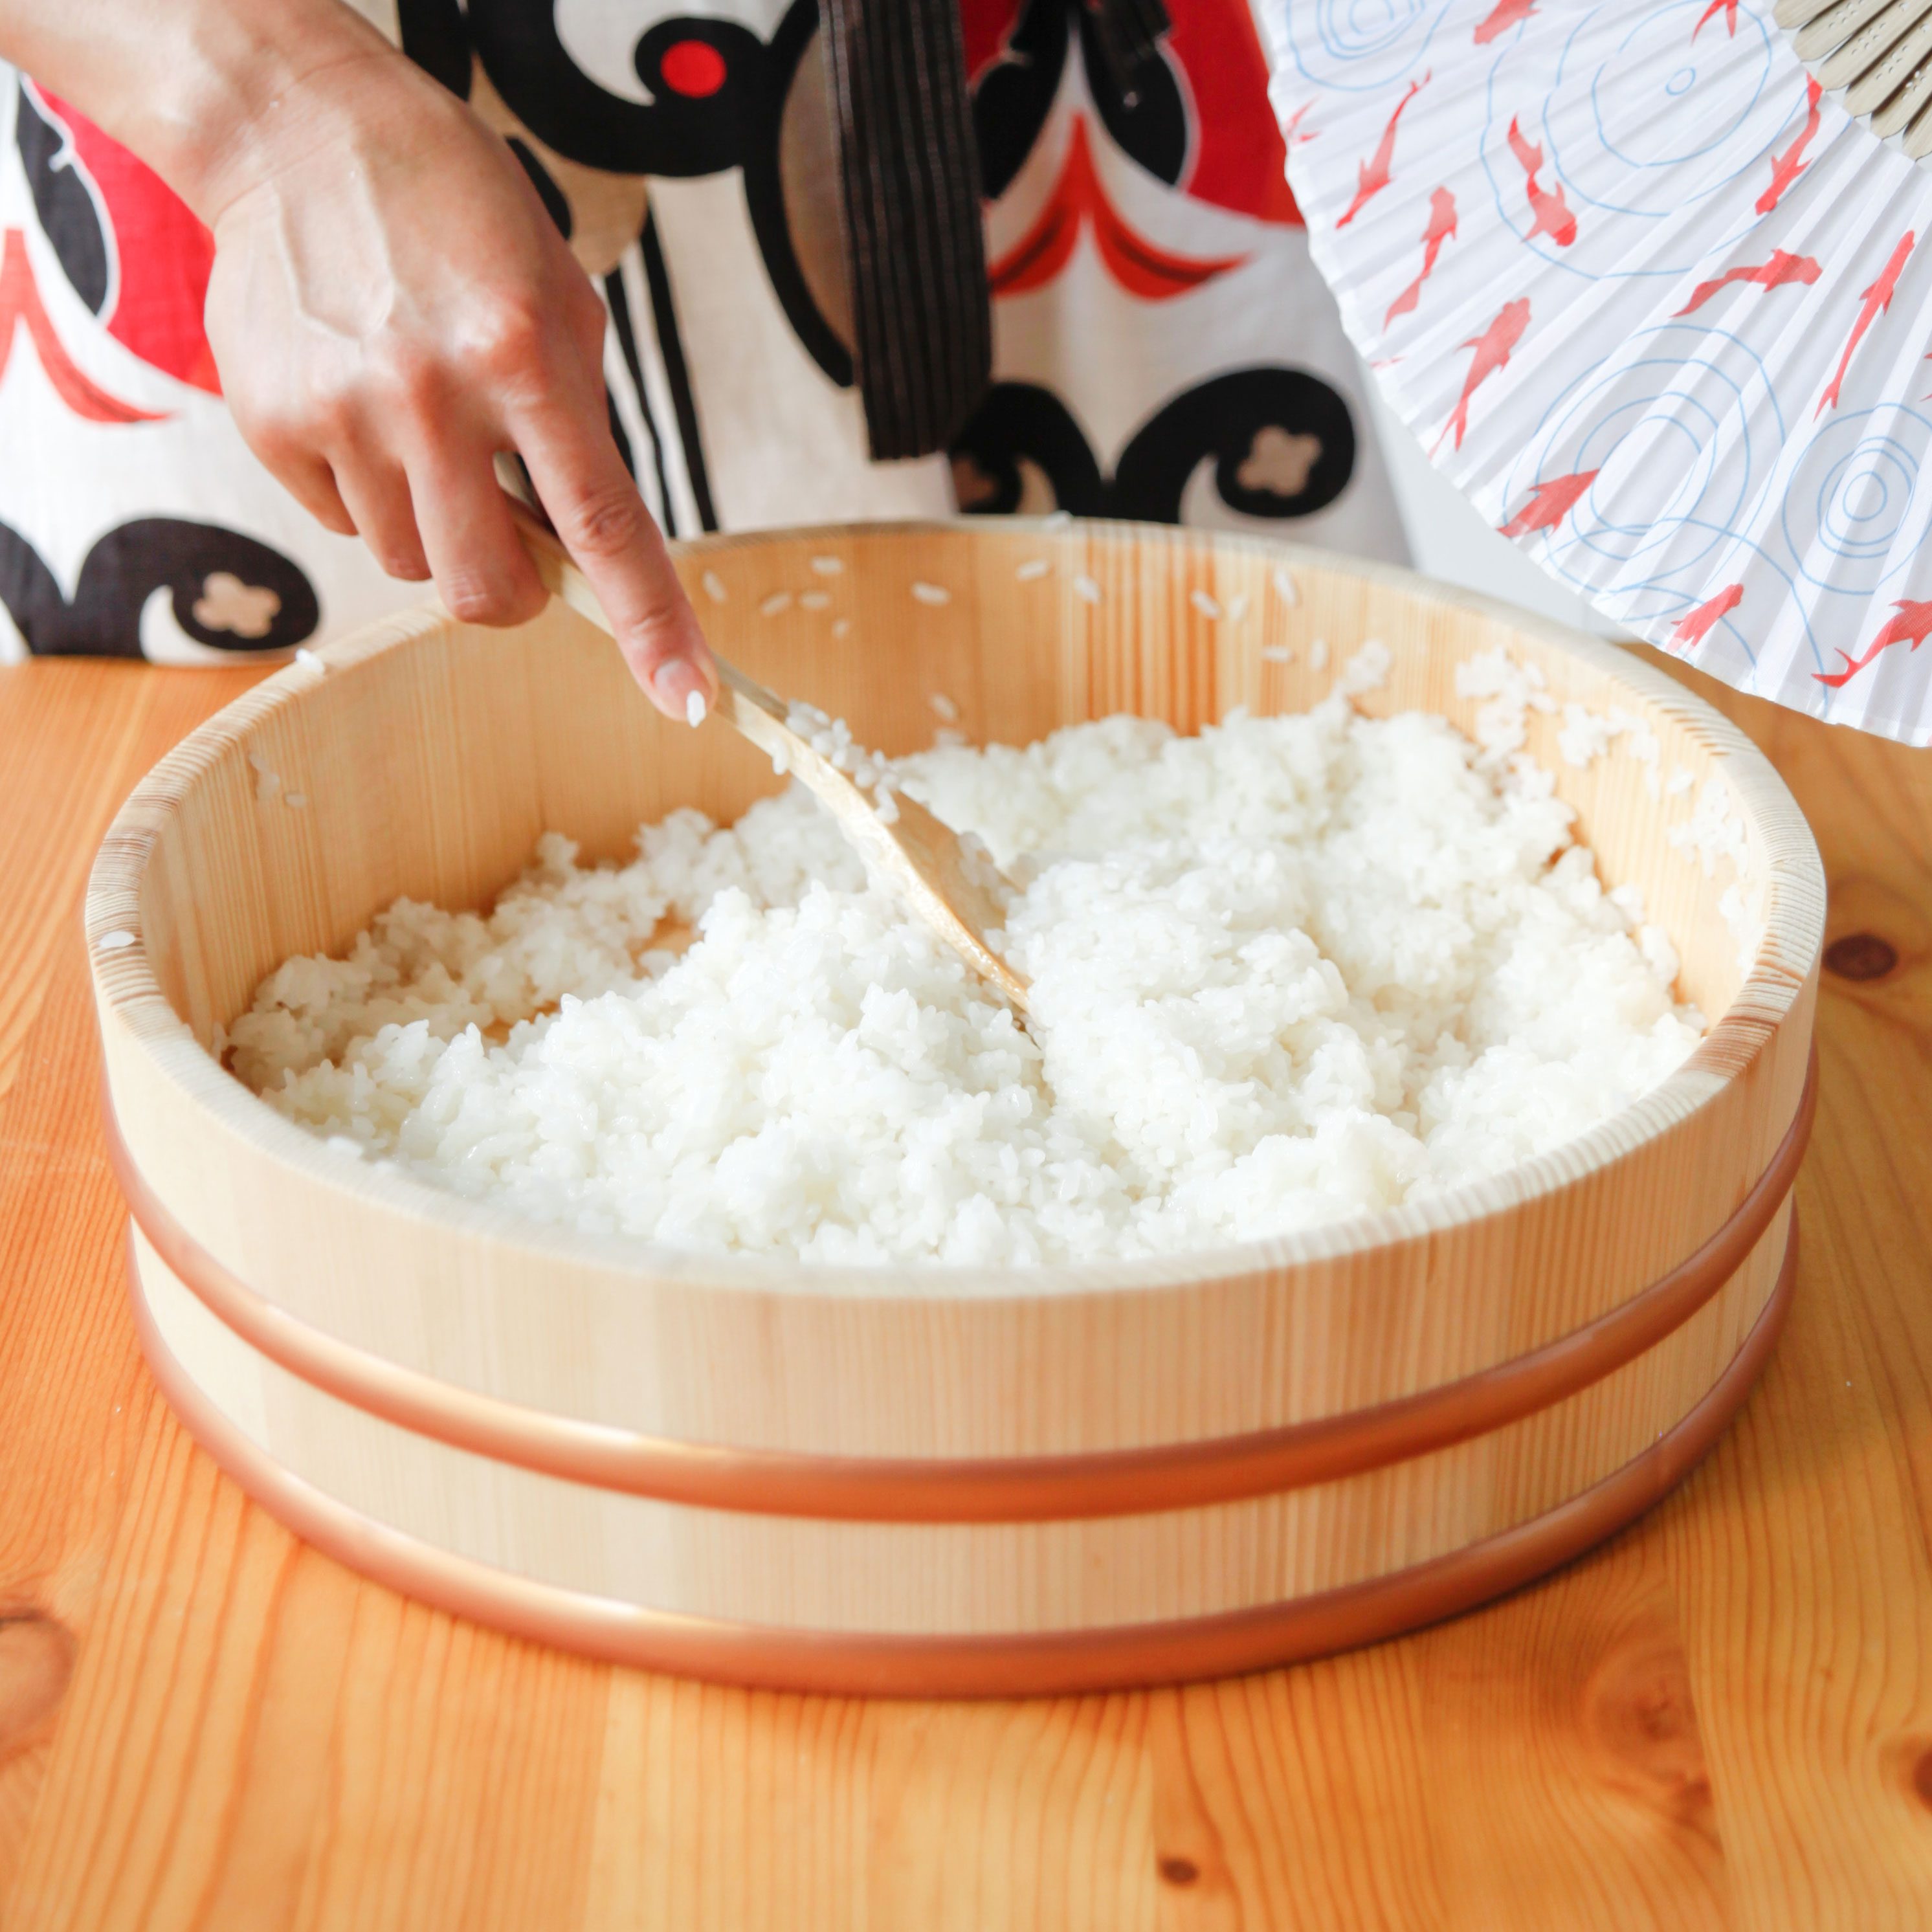 How to Make Sushi Rice at Home: A Step-by-Step Guide to Perfectly Seasoned and Textured Rice